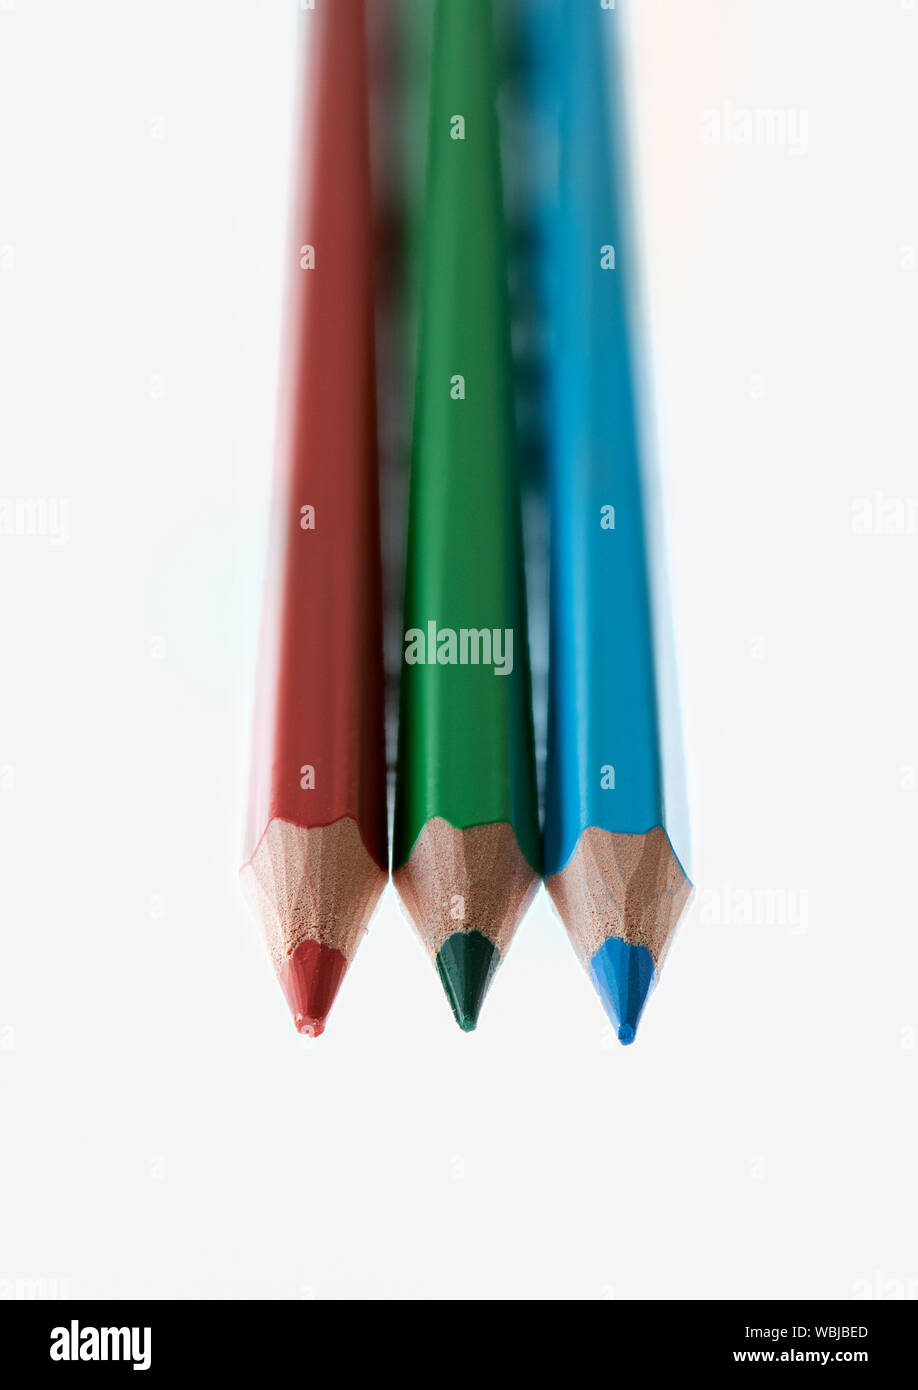 Red, green and blue coloured pencils against a white background Stock Photo